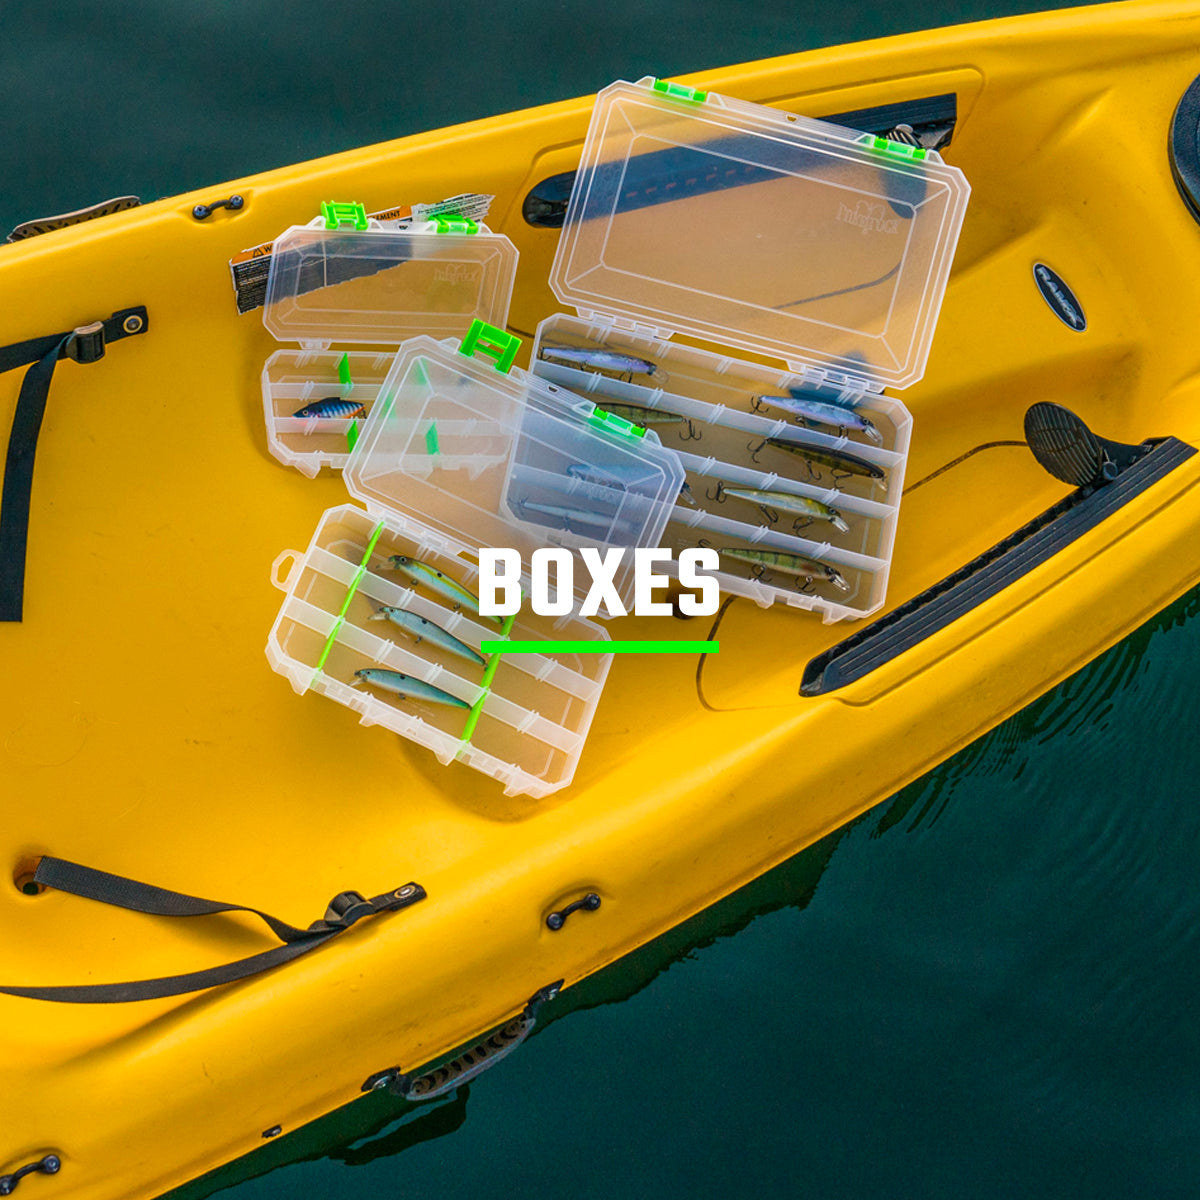 Lure Lock now offers a New 4-inch Deep Tacky Tackle Box - Share the Outdoors